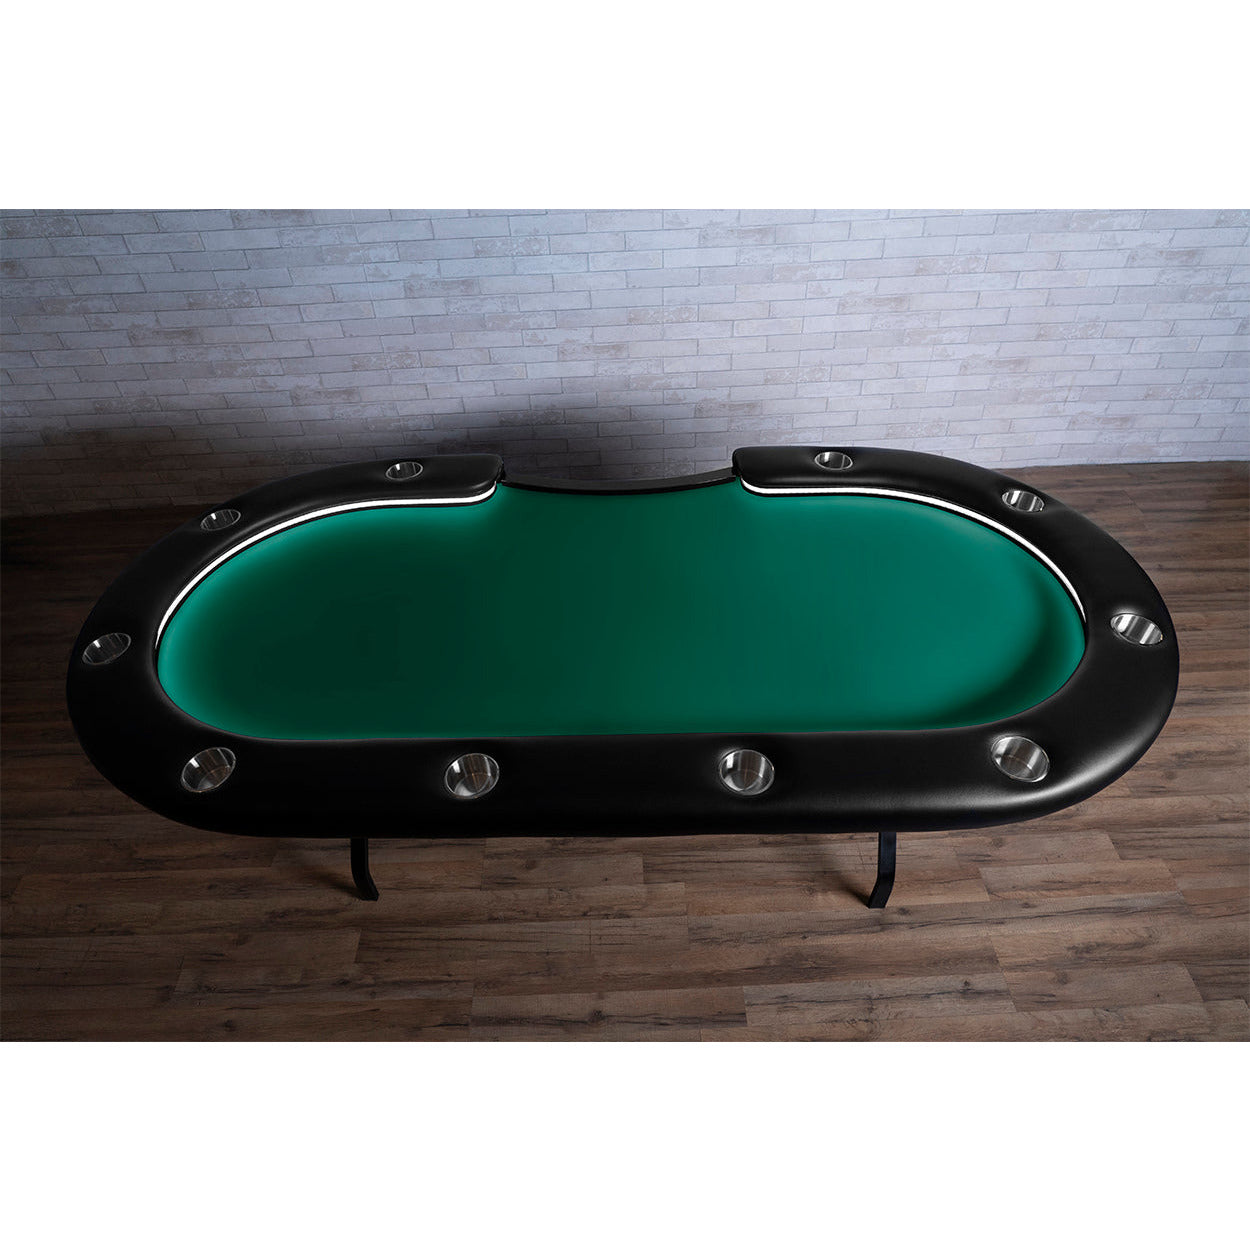 BBO The Aces Pro Alpha Folding Poker Table green top view 